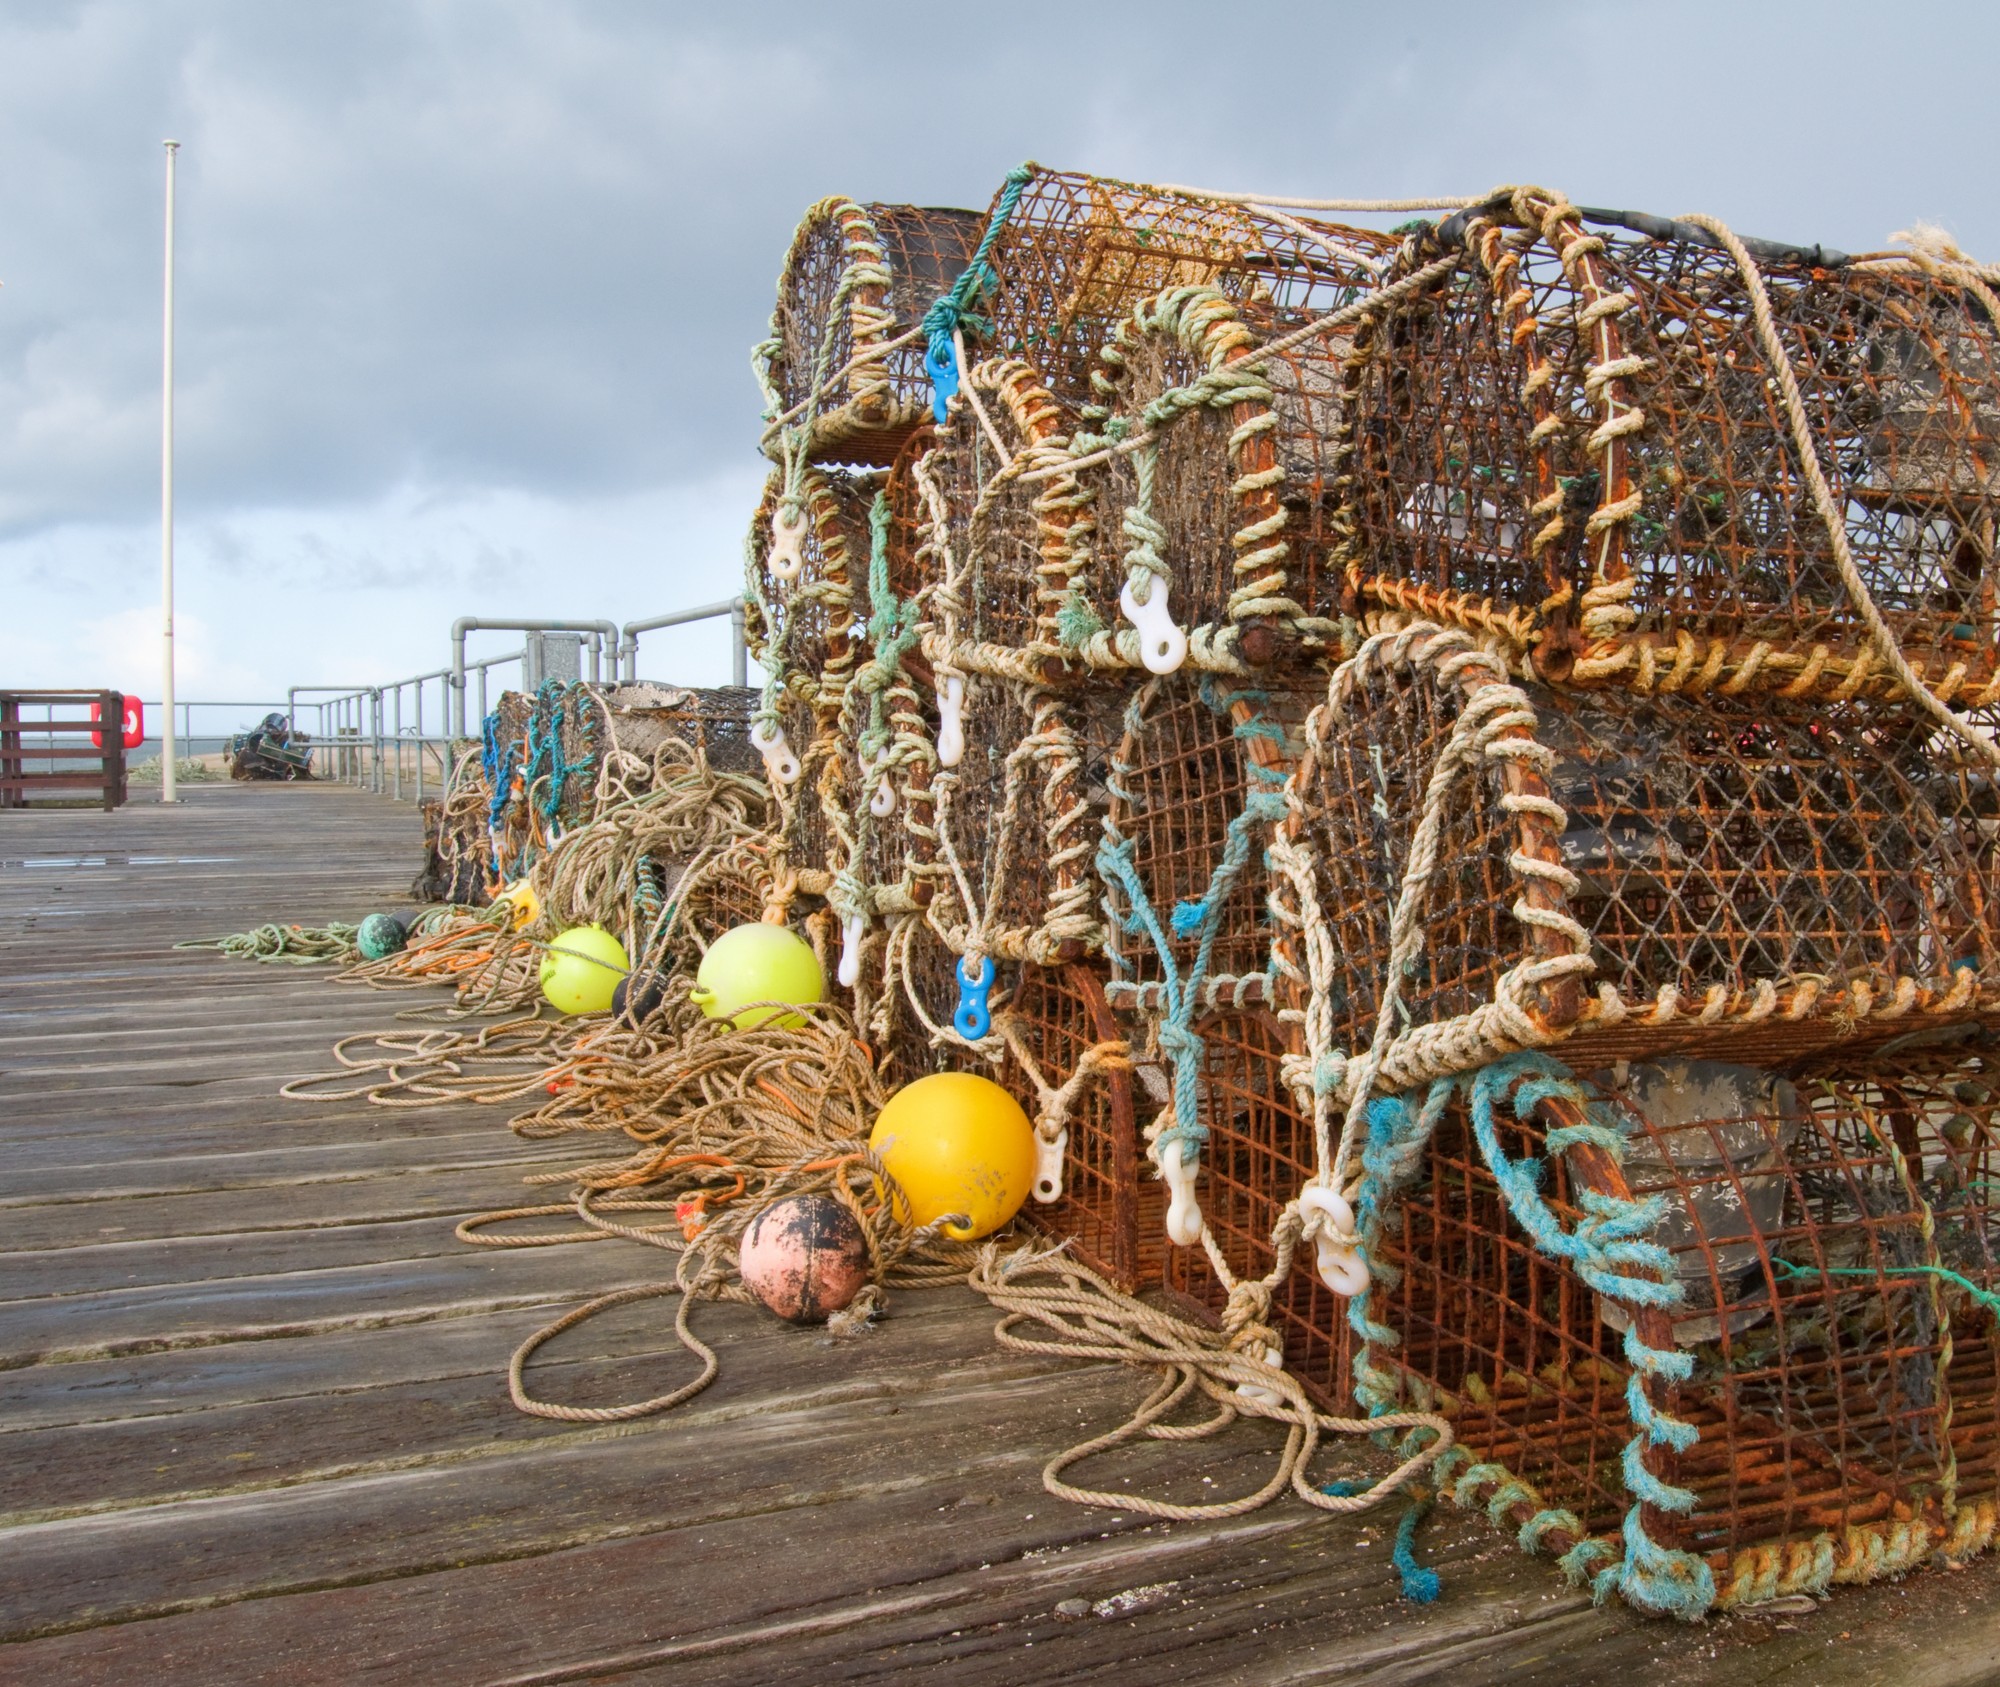 Lobster pots of the Aberdovey pier – Aberdovey Seafront Accommodation